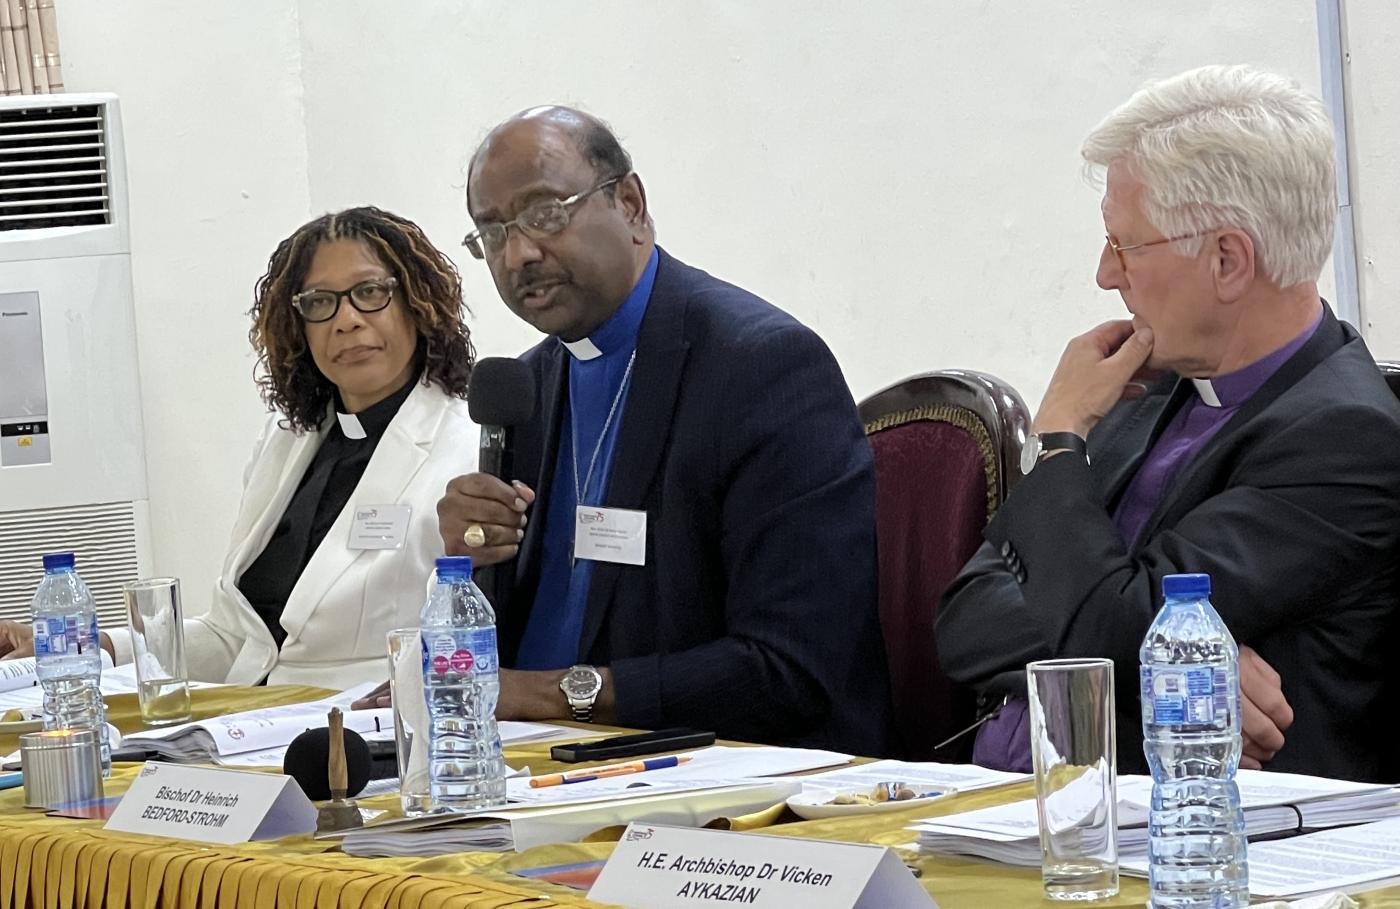 WCC general secretary reports at the WCC executive committee